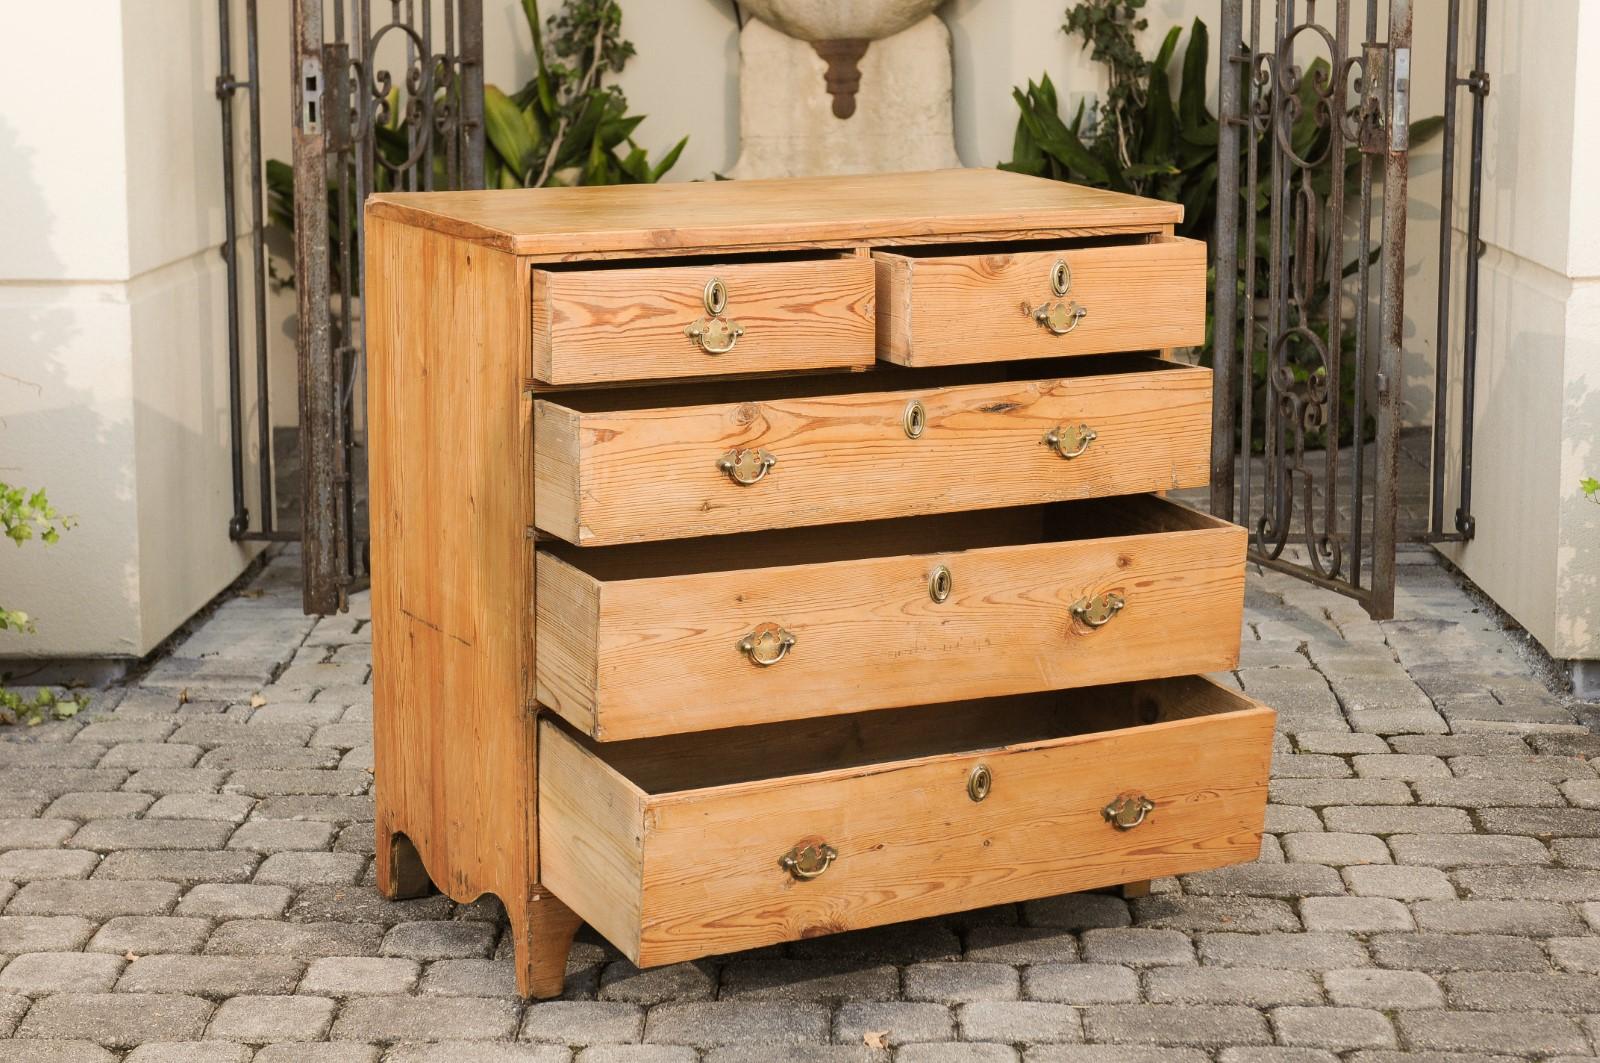 An English Georgian period pine chest-of-drawers from the early 19th century, with bracket feet. Born in England during the first quarter of the 19th century, this charming chest features a rectangular top sitting above five graduated drawers (two